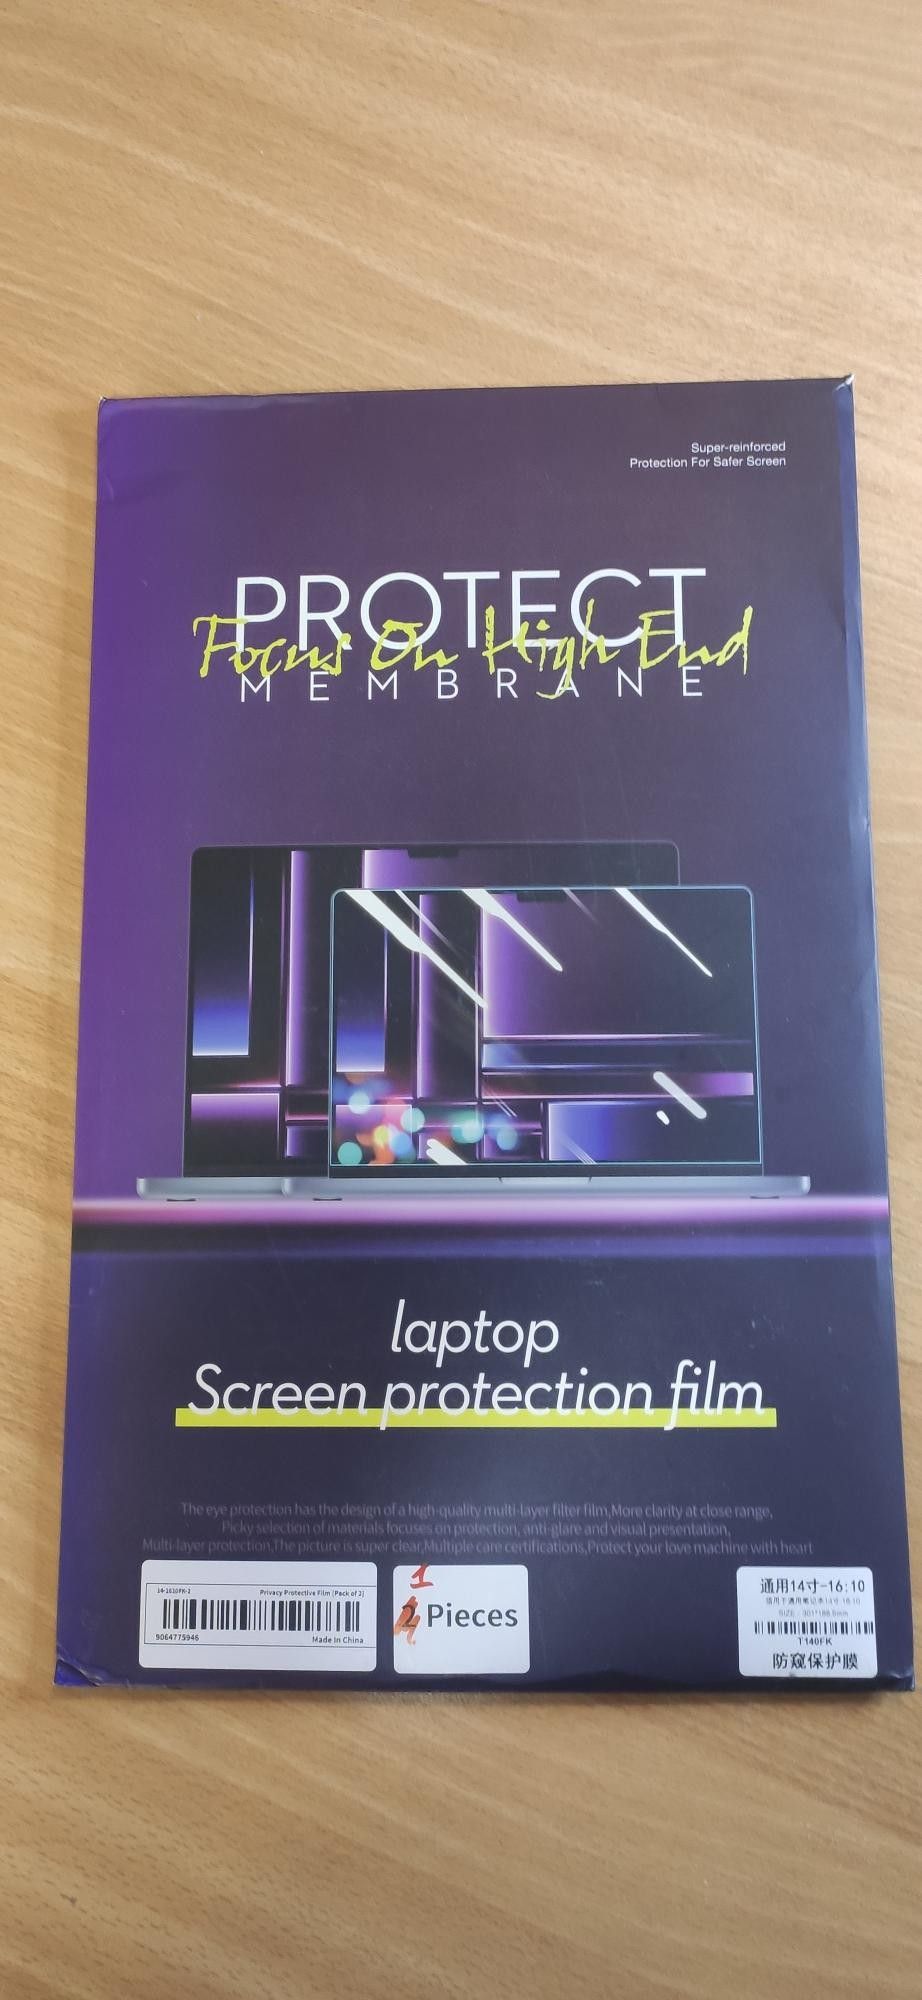 Screen protection film 14"